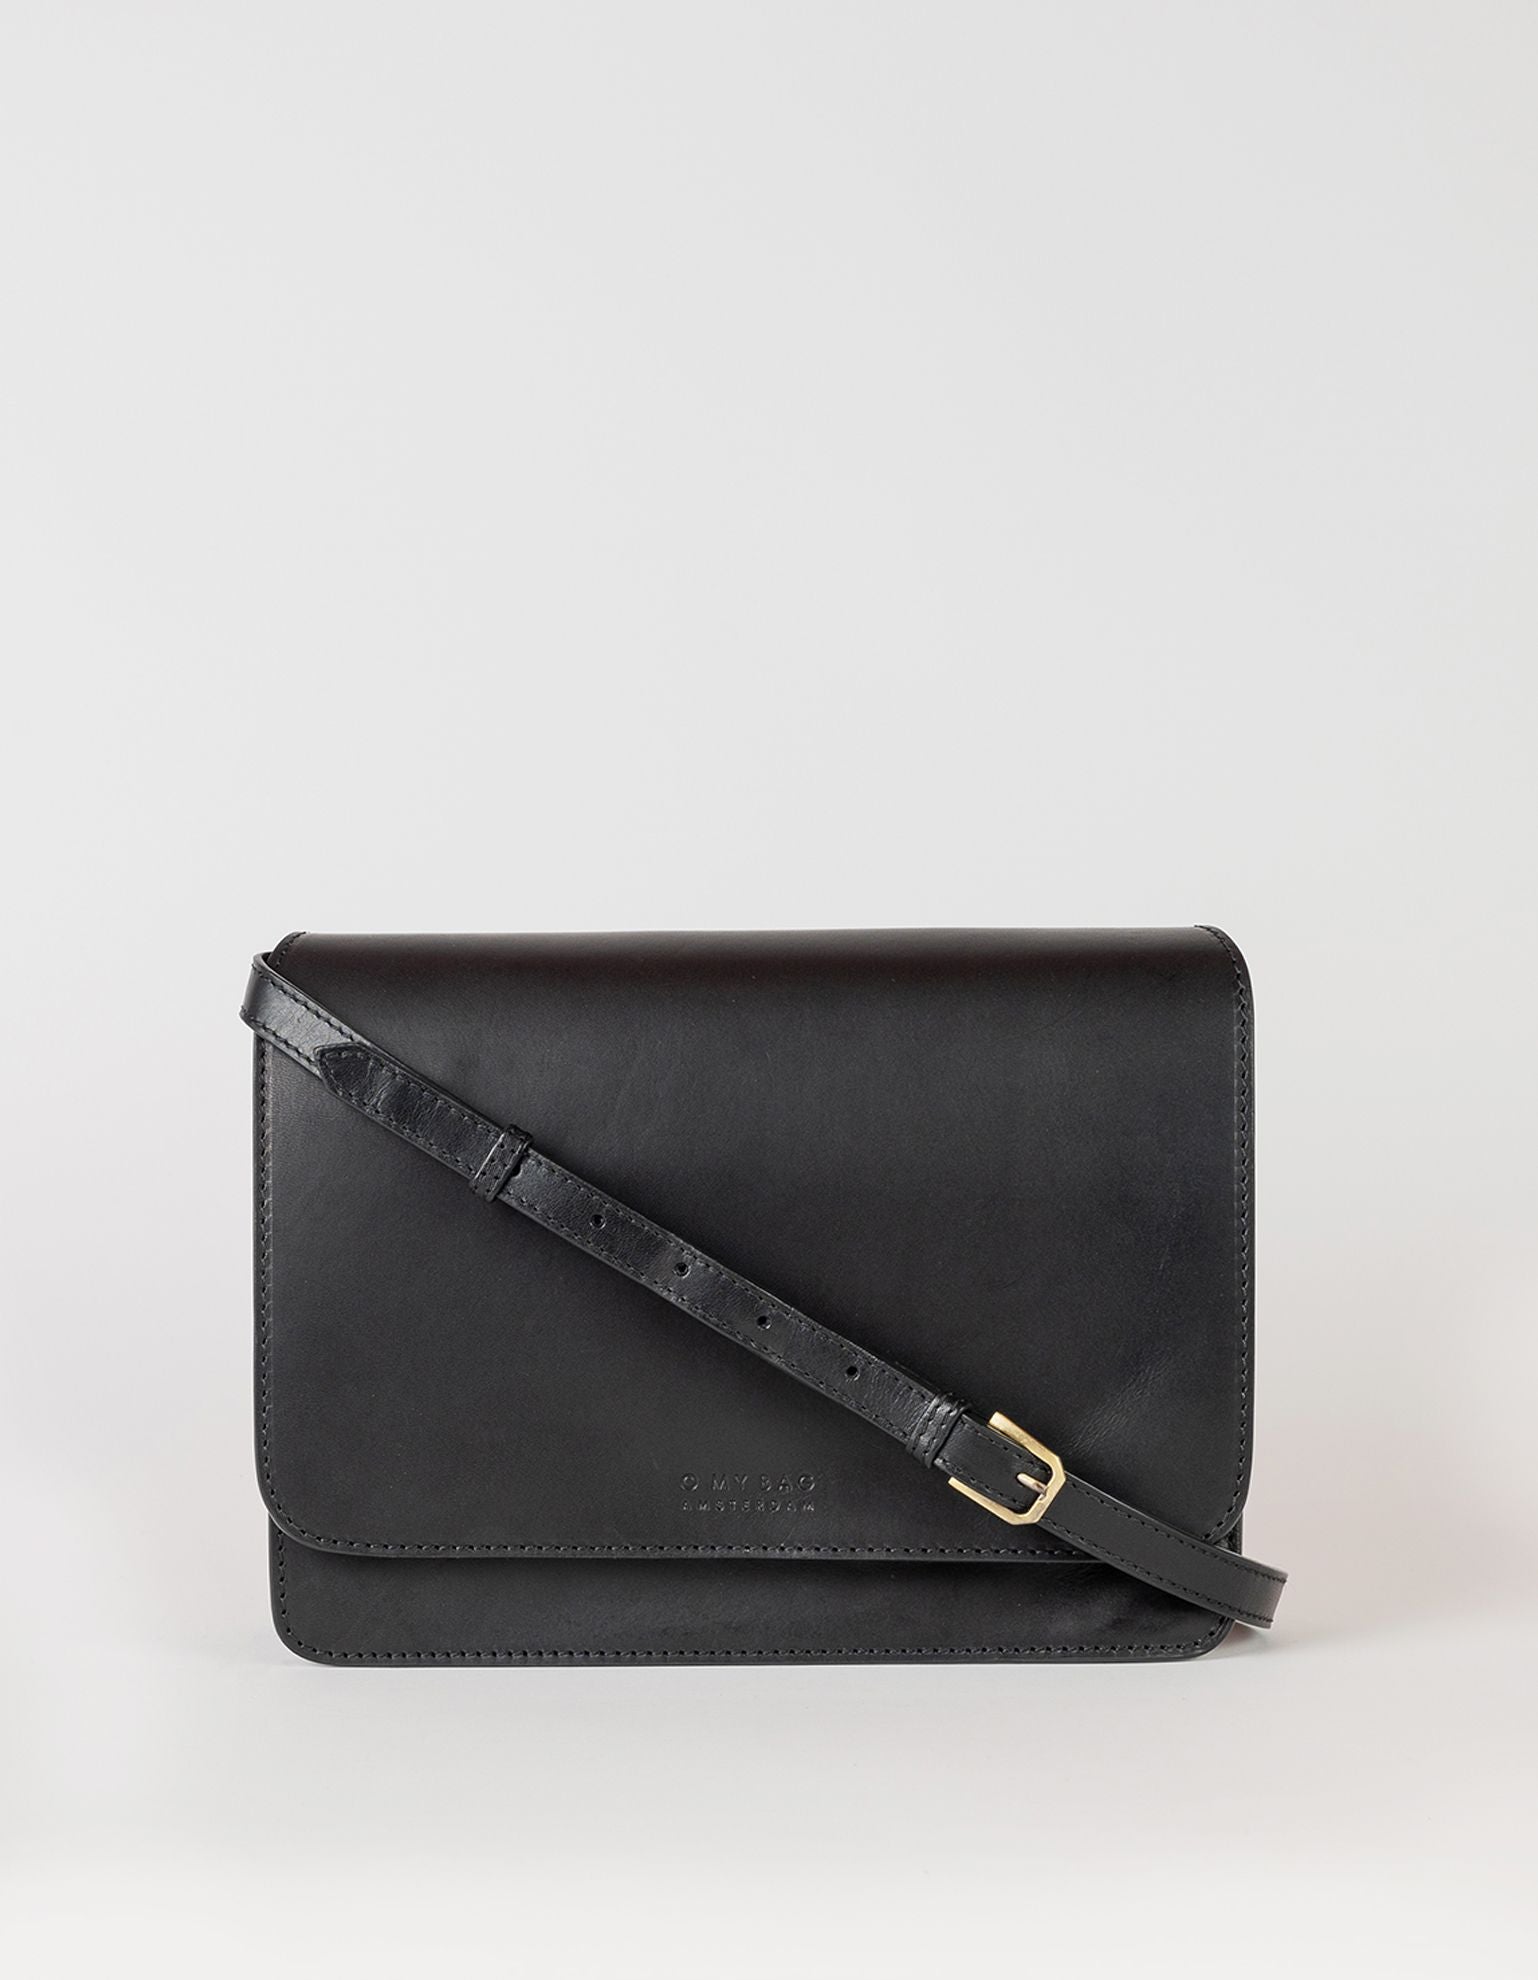 Audrey black classic leather bag. With adjustable leather strap. Front product image.